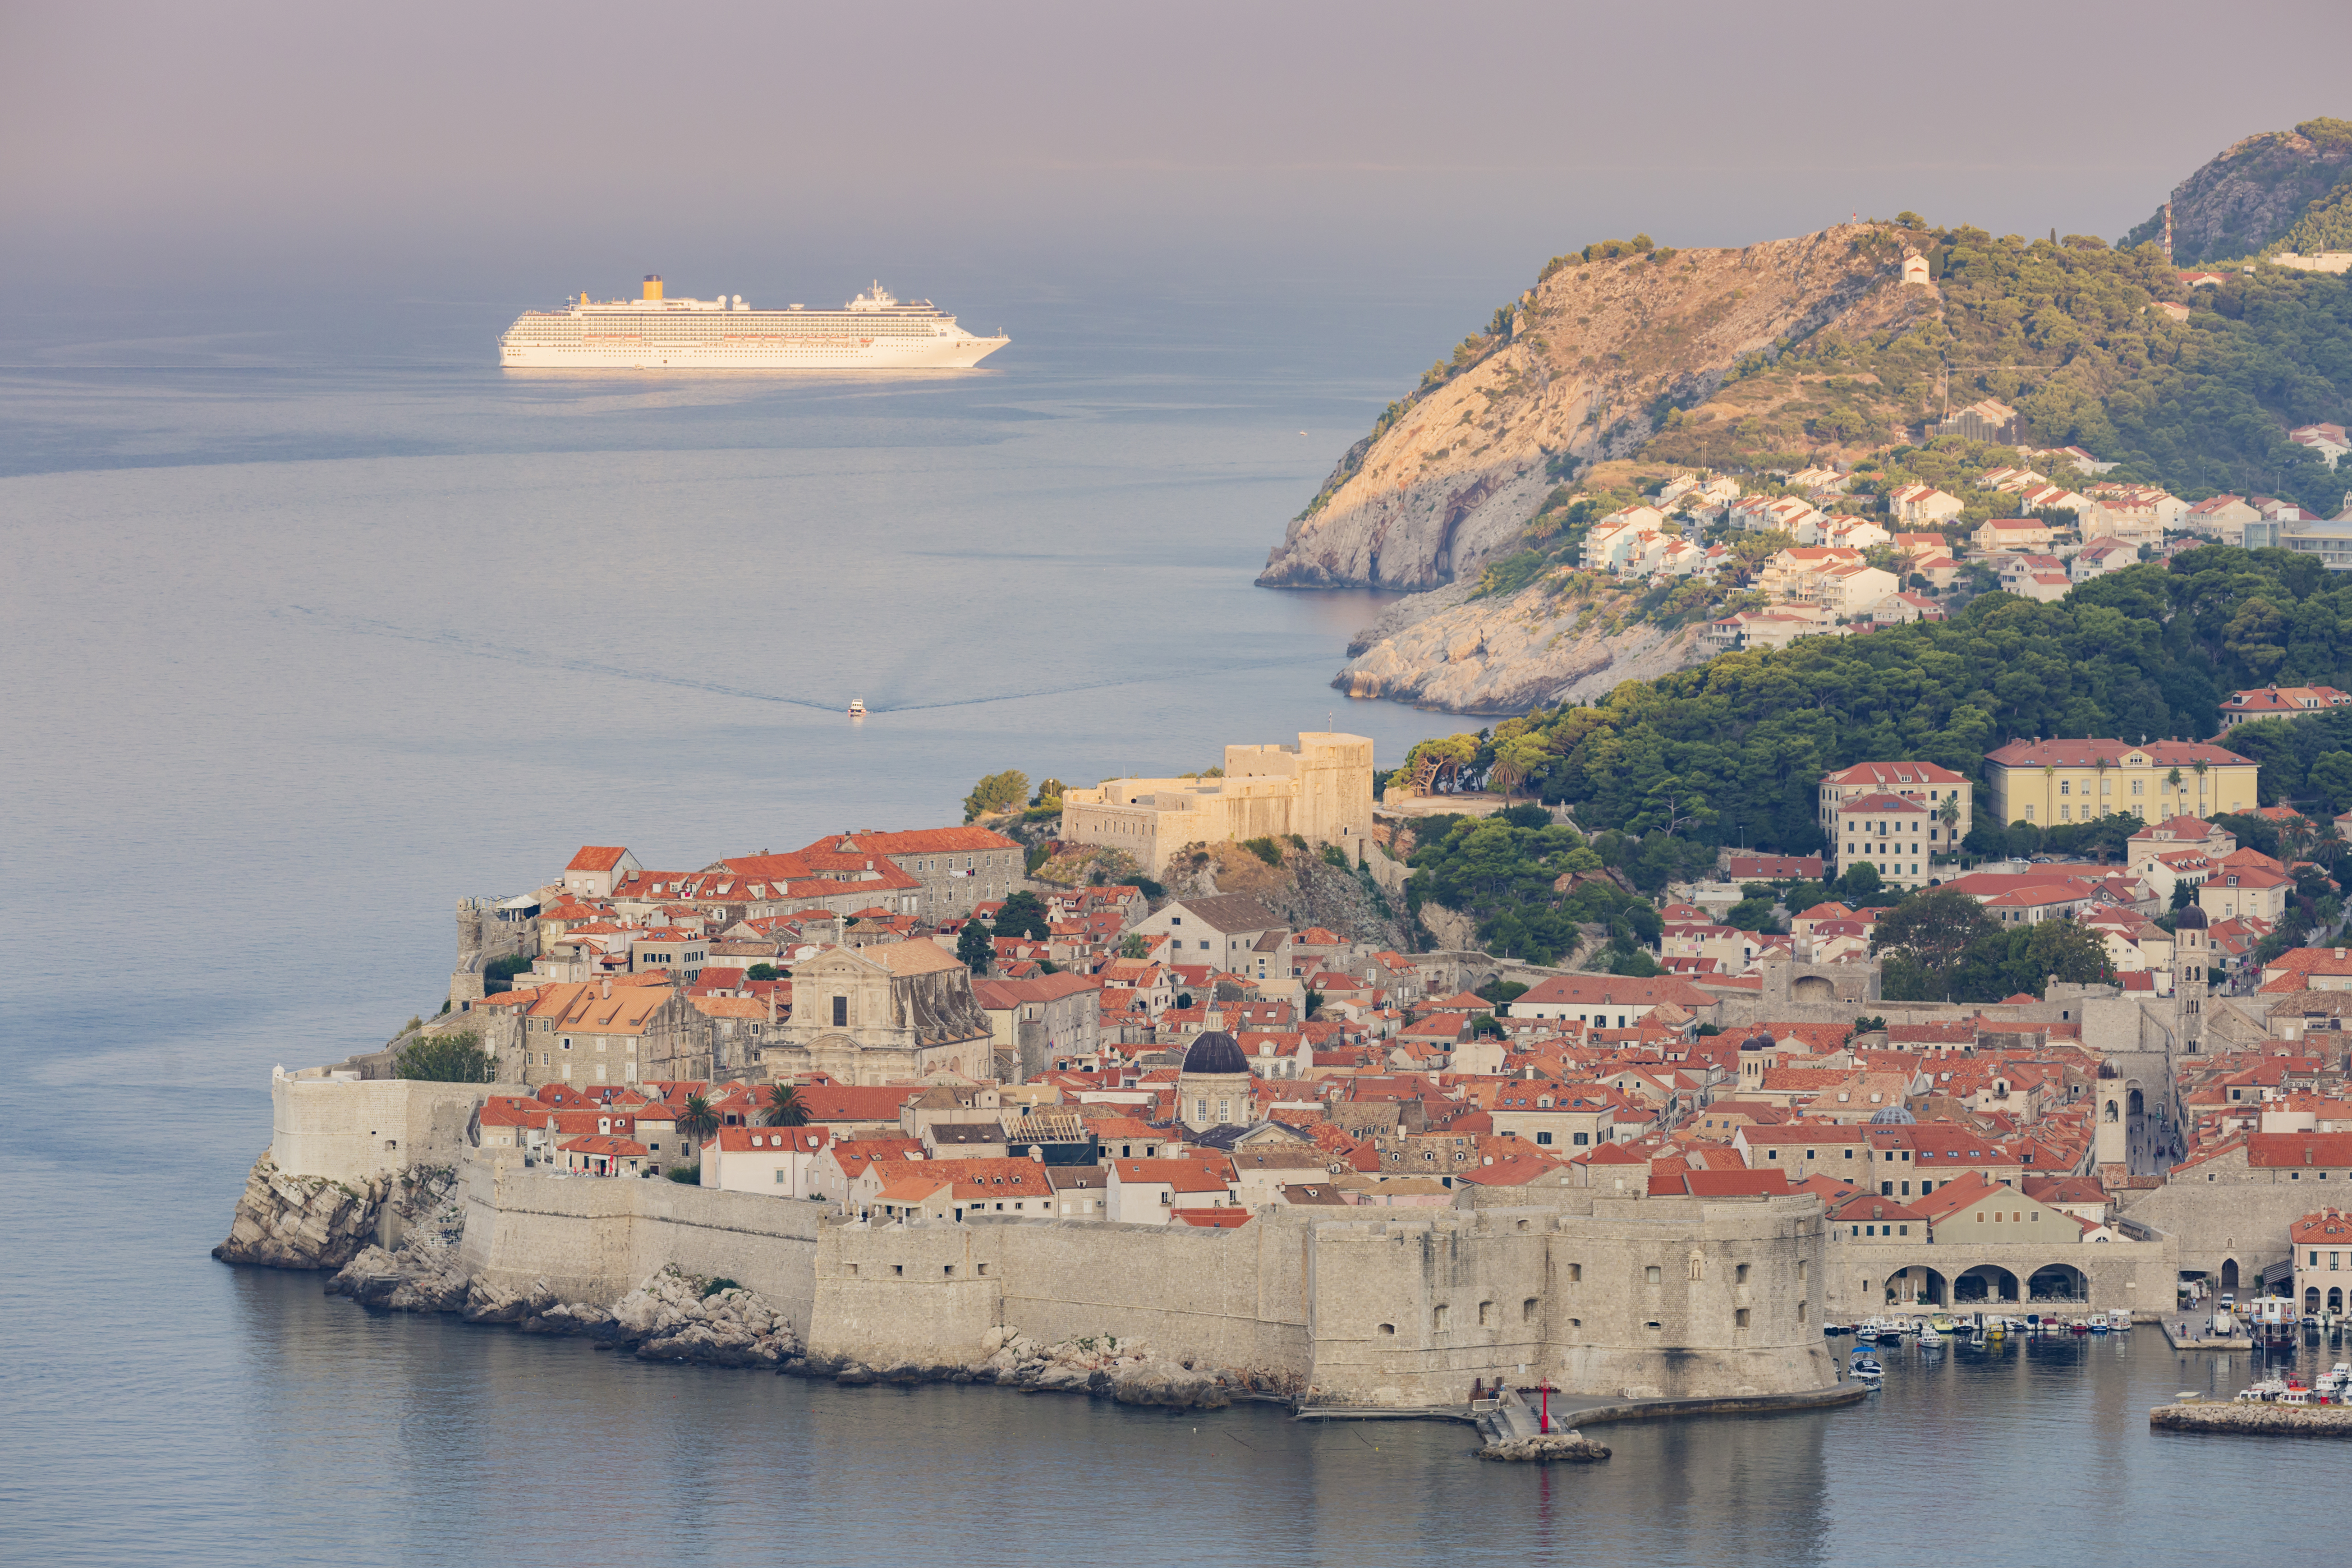 A cruis ship passes in the distance of Dubrovnik's Old Town